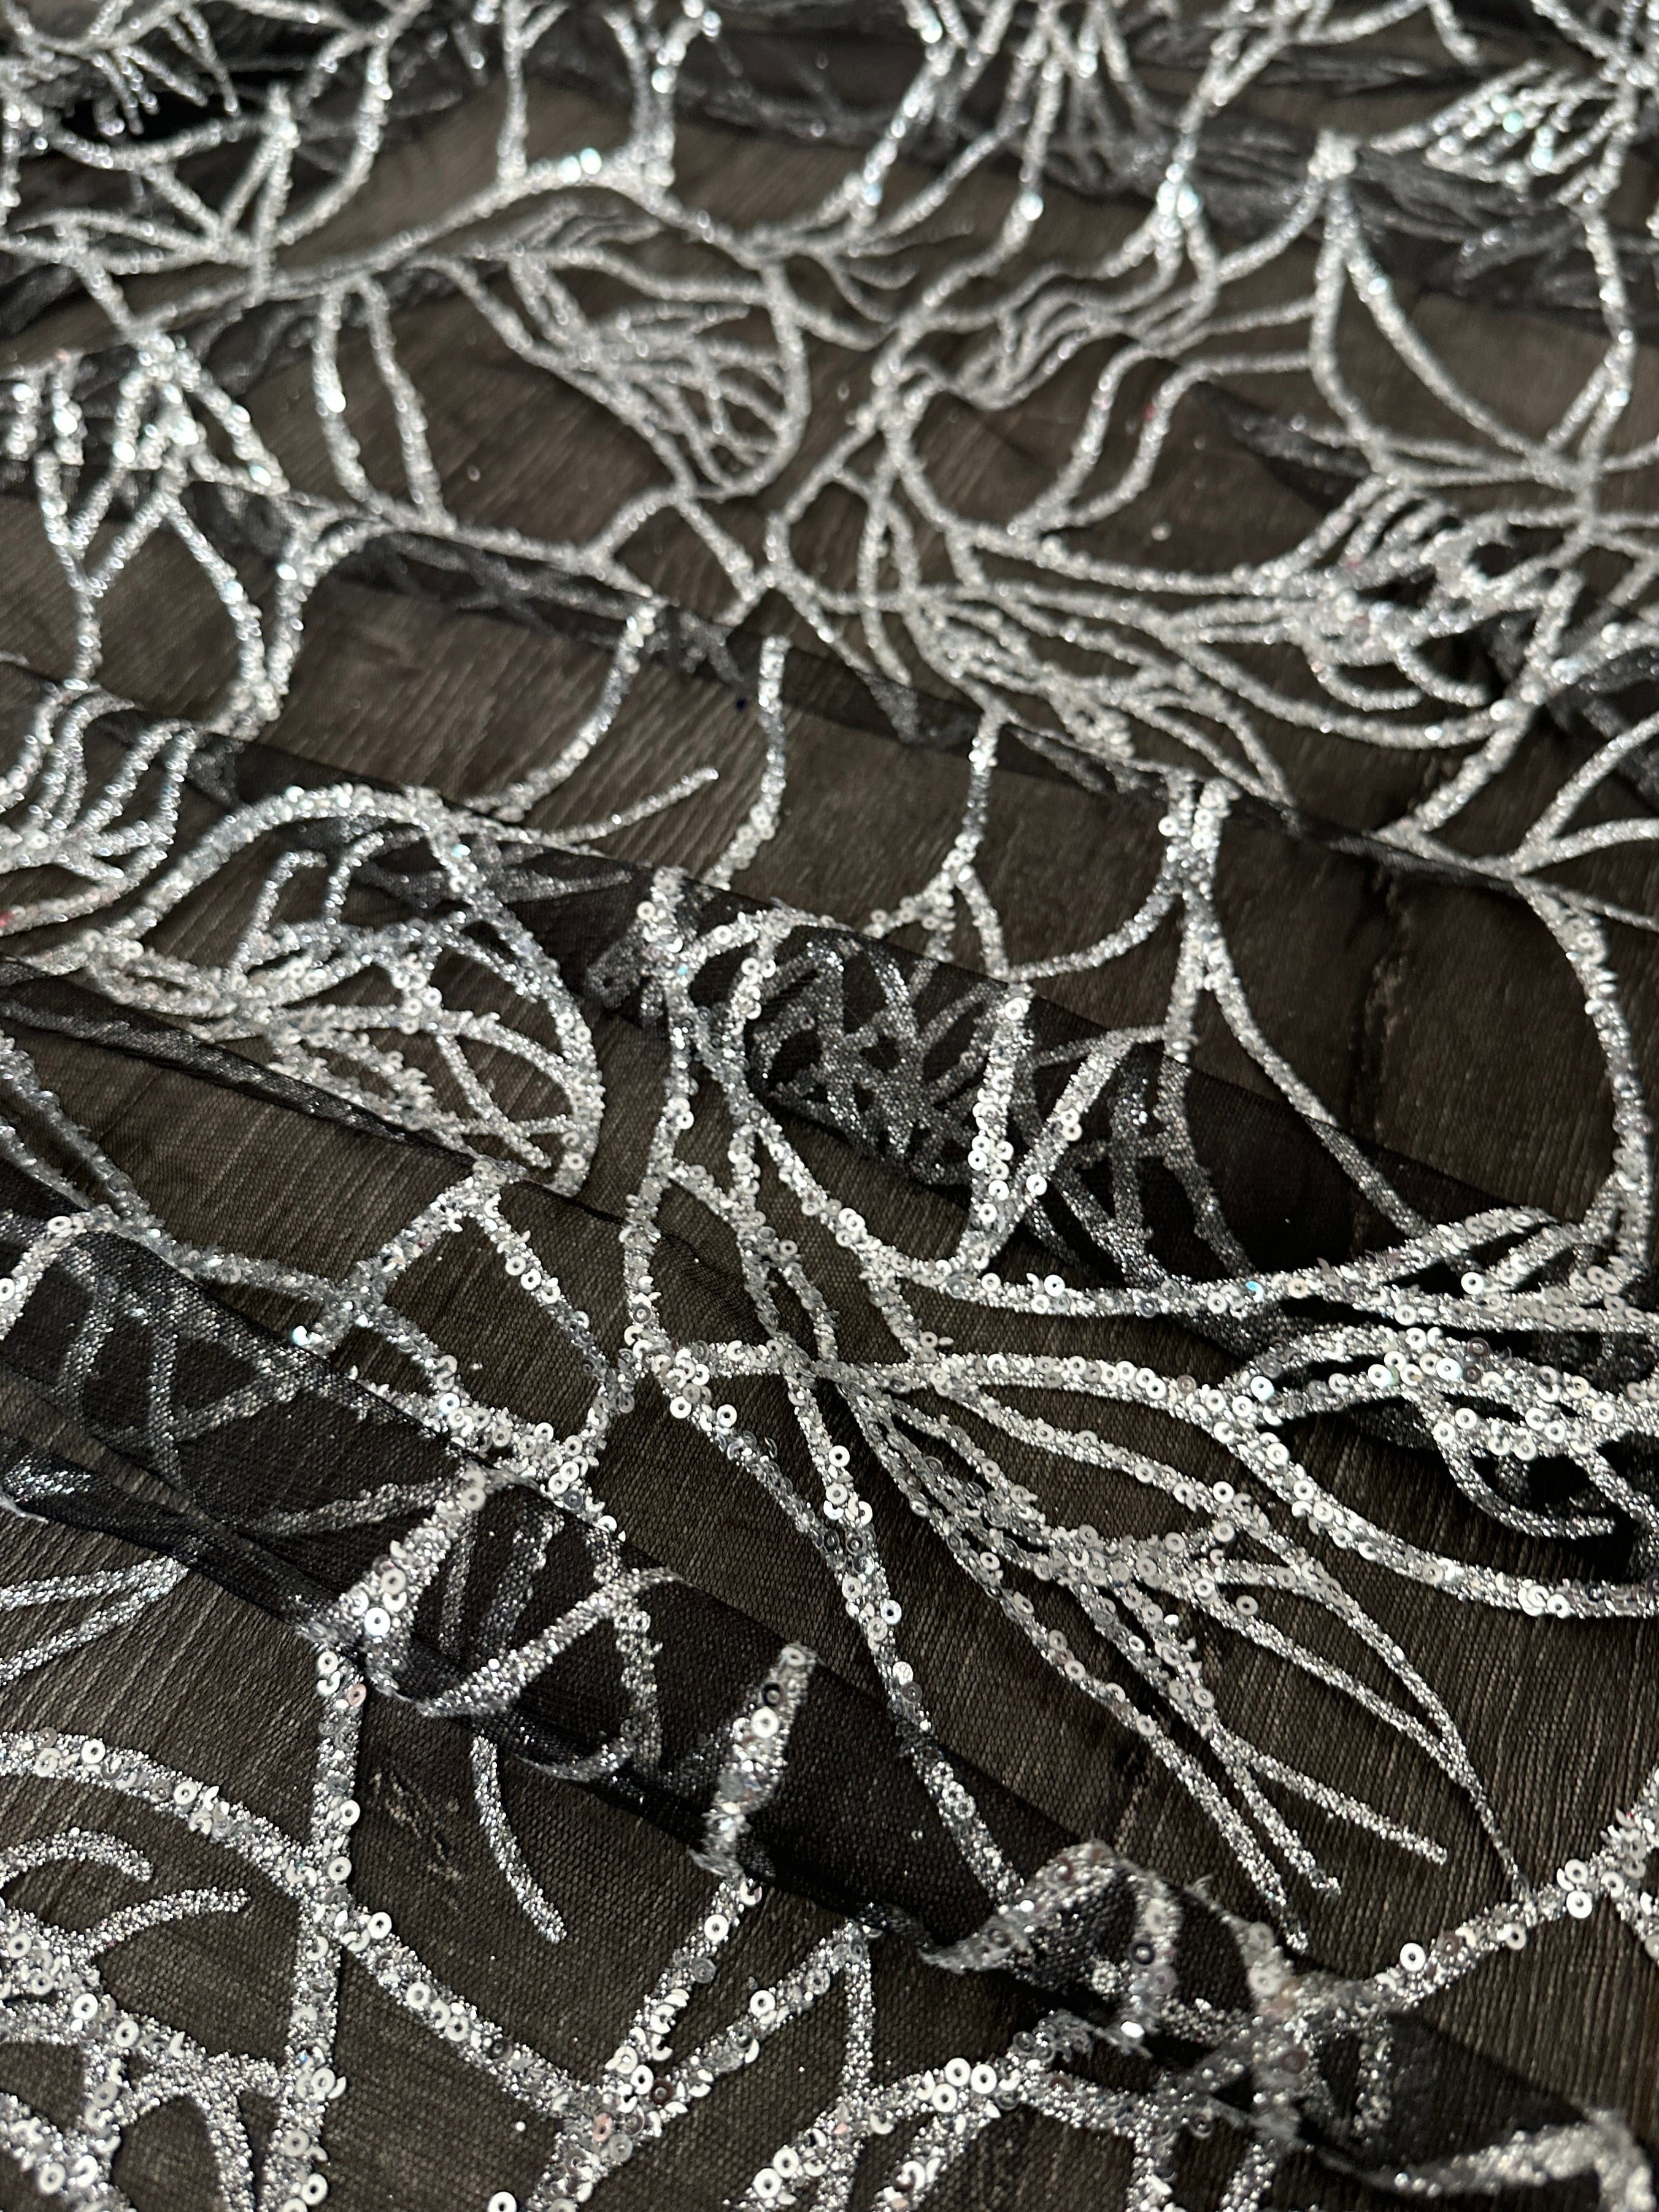 Silver Sequin Glitter Webbed Design Lace Fabric, Geometric Silver Stretch Lace on Black Mesh, Shimmer Silver lace for gown, Bridal Lace, lace fabric on discount, lace fabric on sale, premium lace fabric, buy lace fabric online, lace fabric for woman, lace fabric for bride